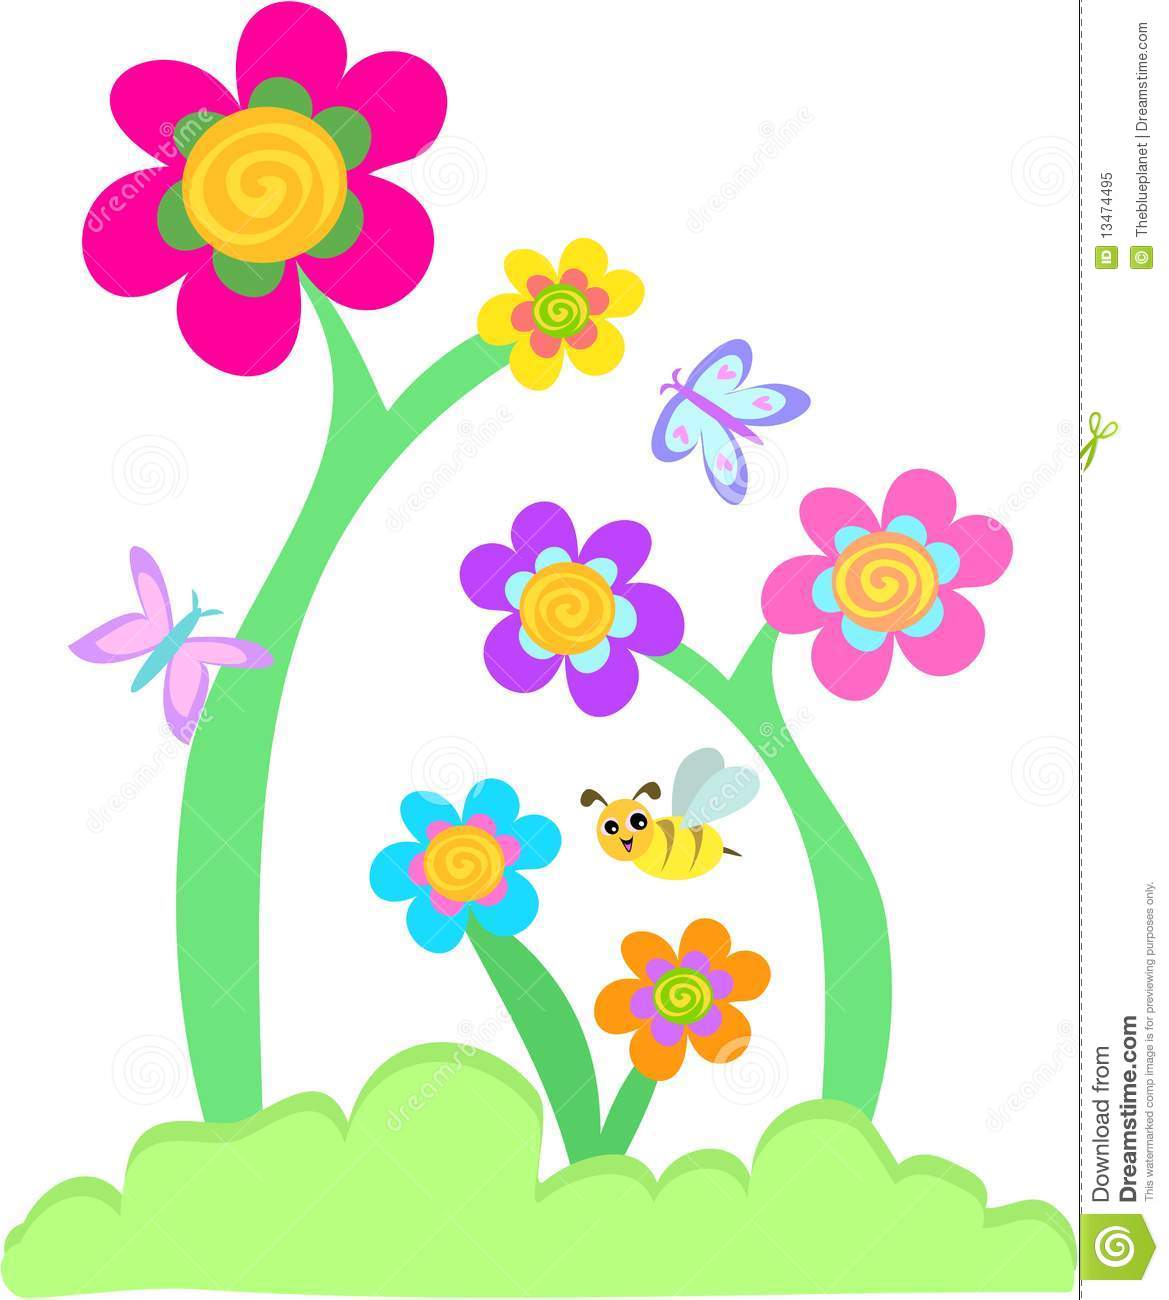 Whimsical Flower Garden with .